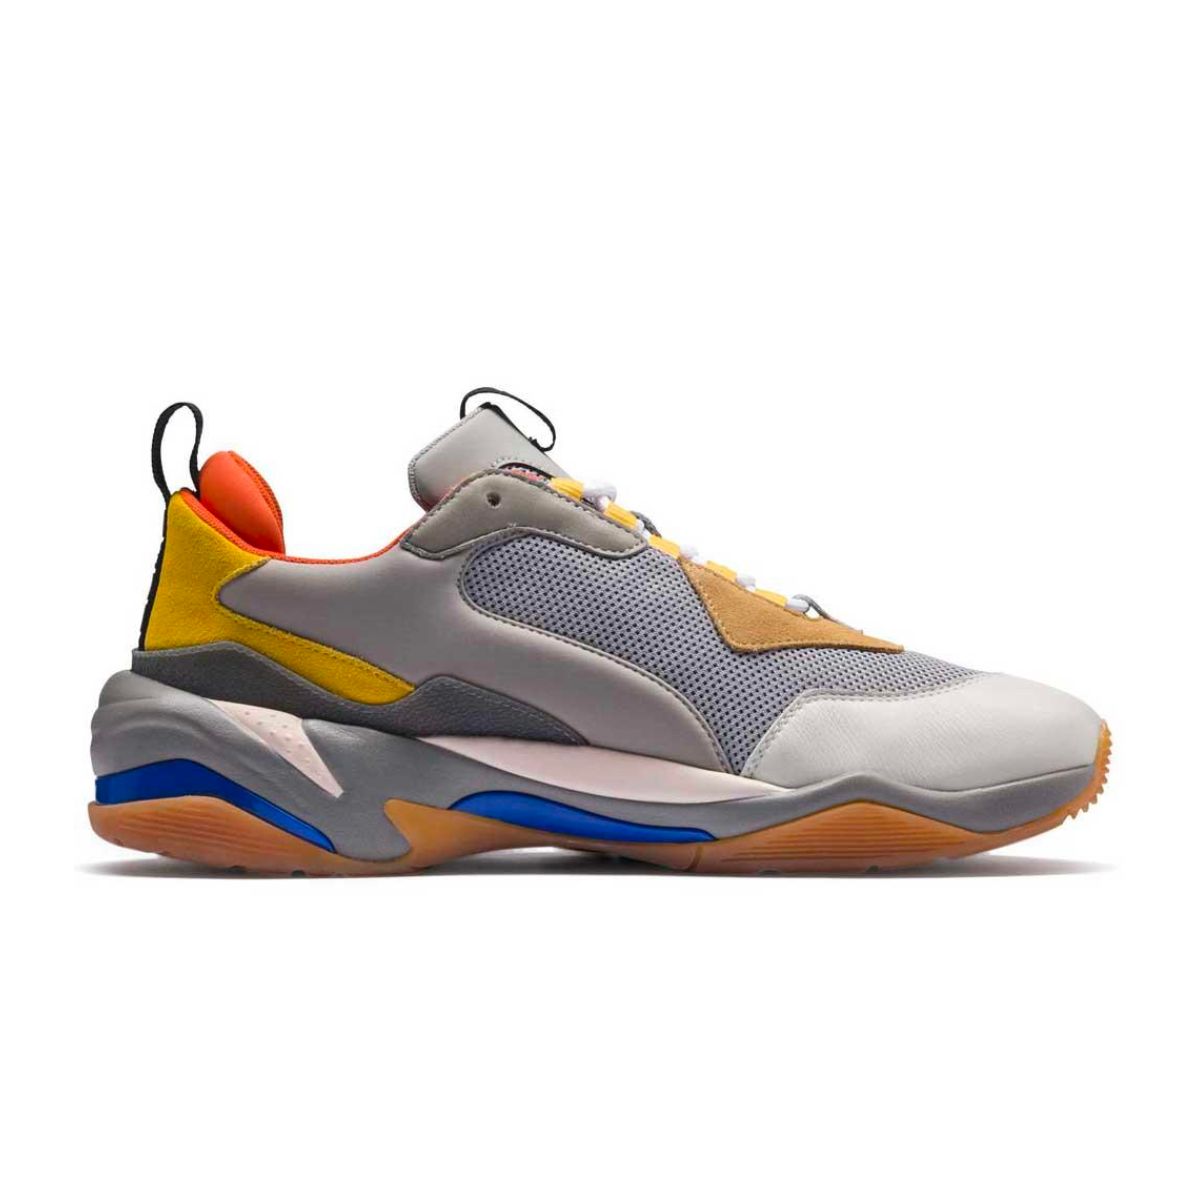 Puma Thunder Spectra Replacement Shoelaces